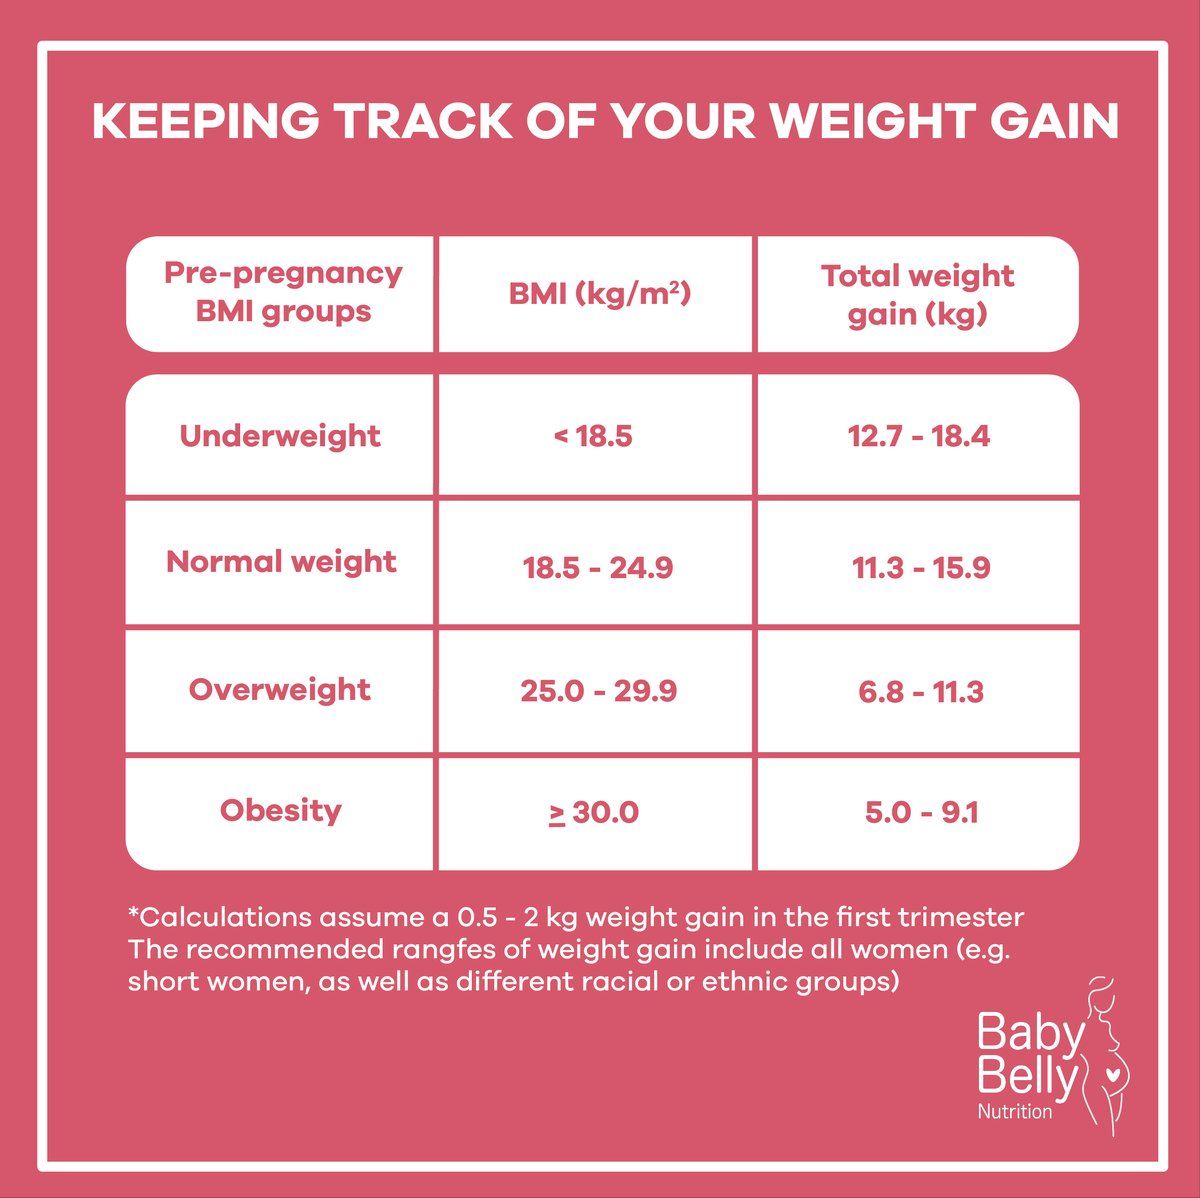 What is normal weight gain during pregnancy?